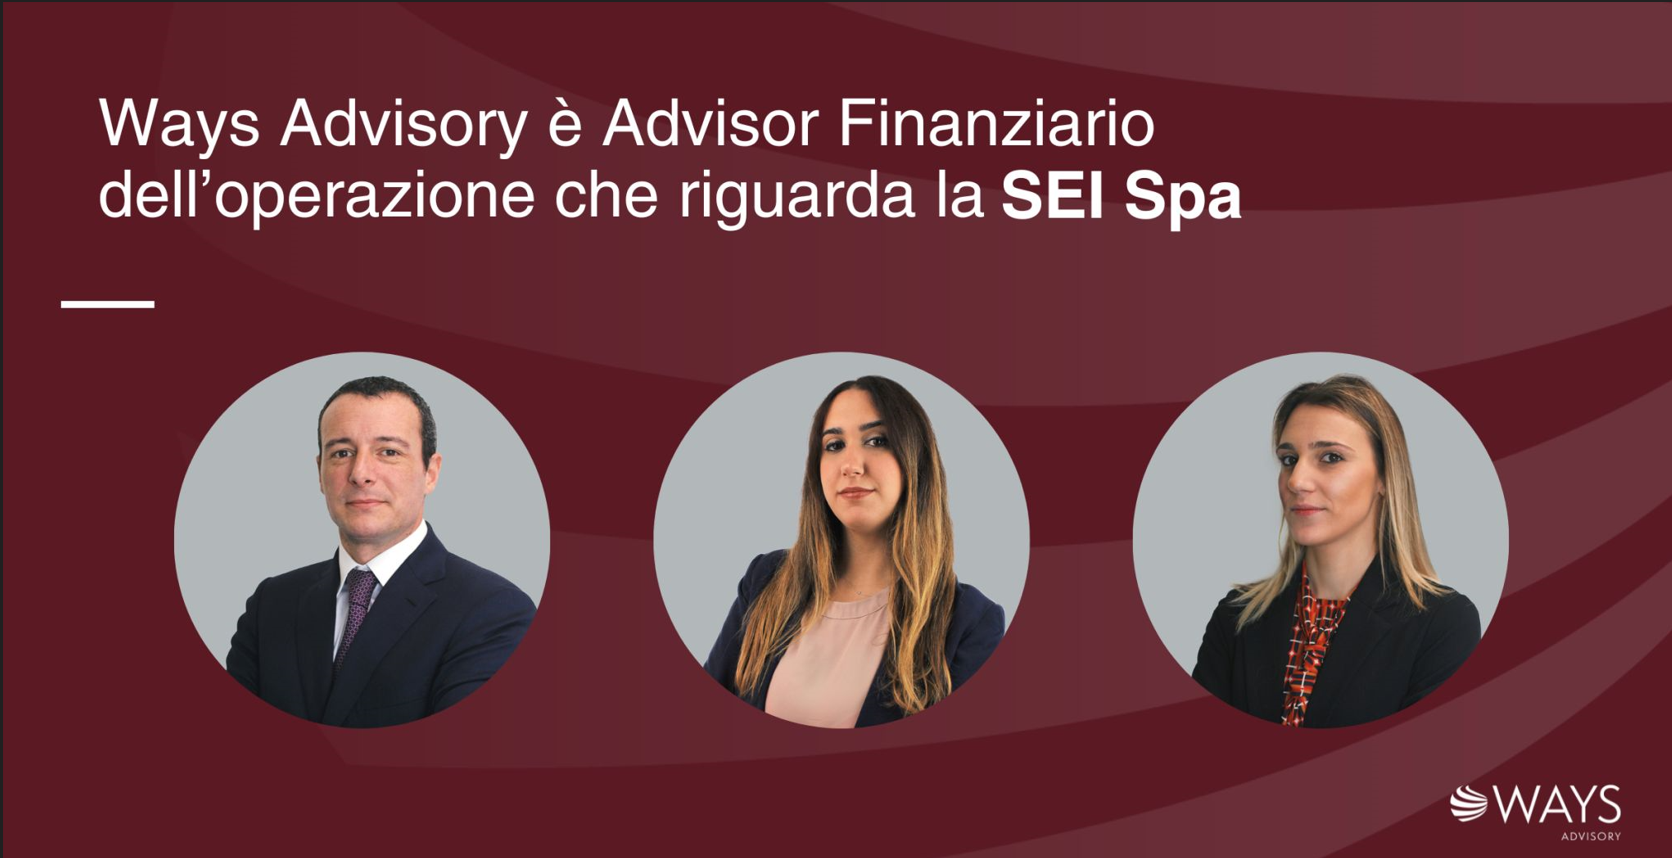 Ways Advisory, previously Fingiaco, is Financial Advisor of the transaction involving SEI Spa, in coordination with Studio BCL Lex